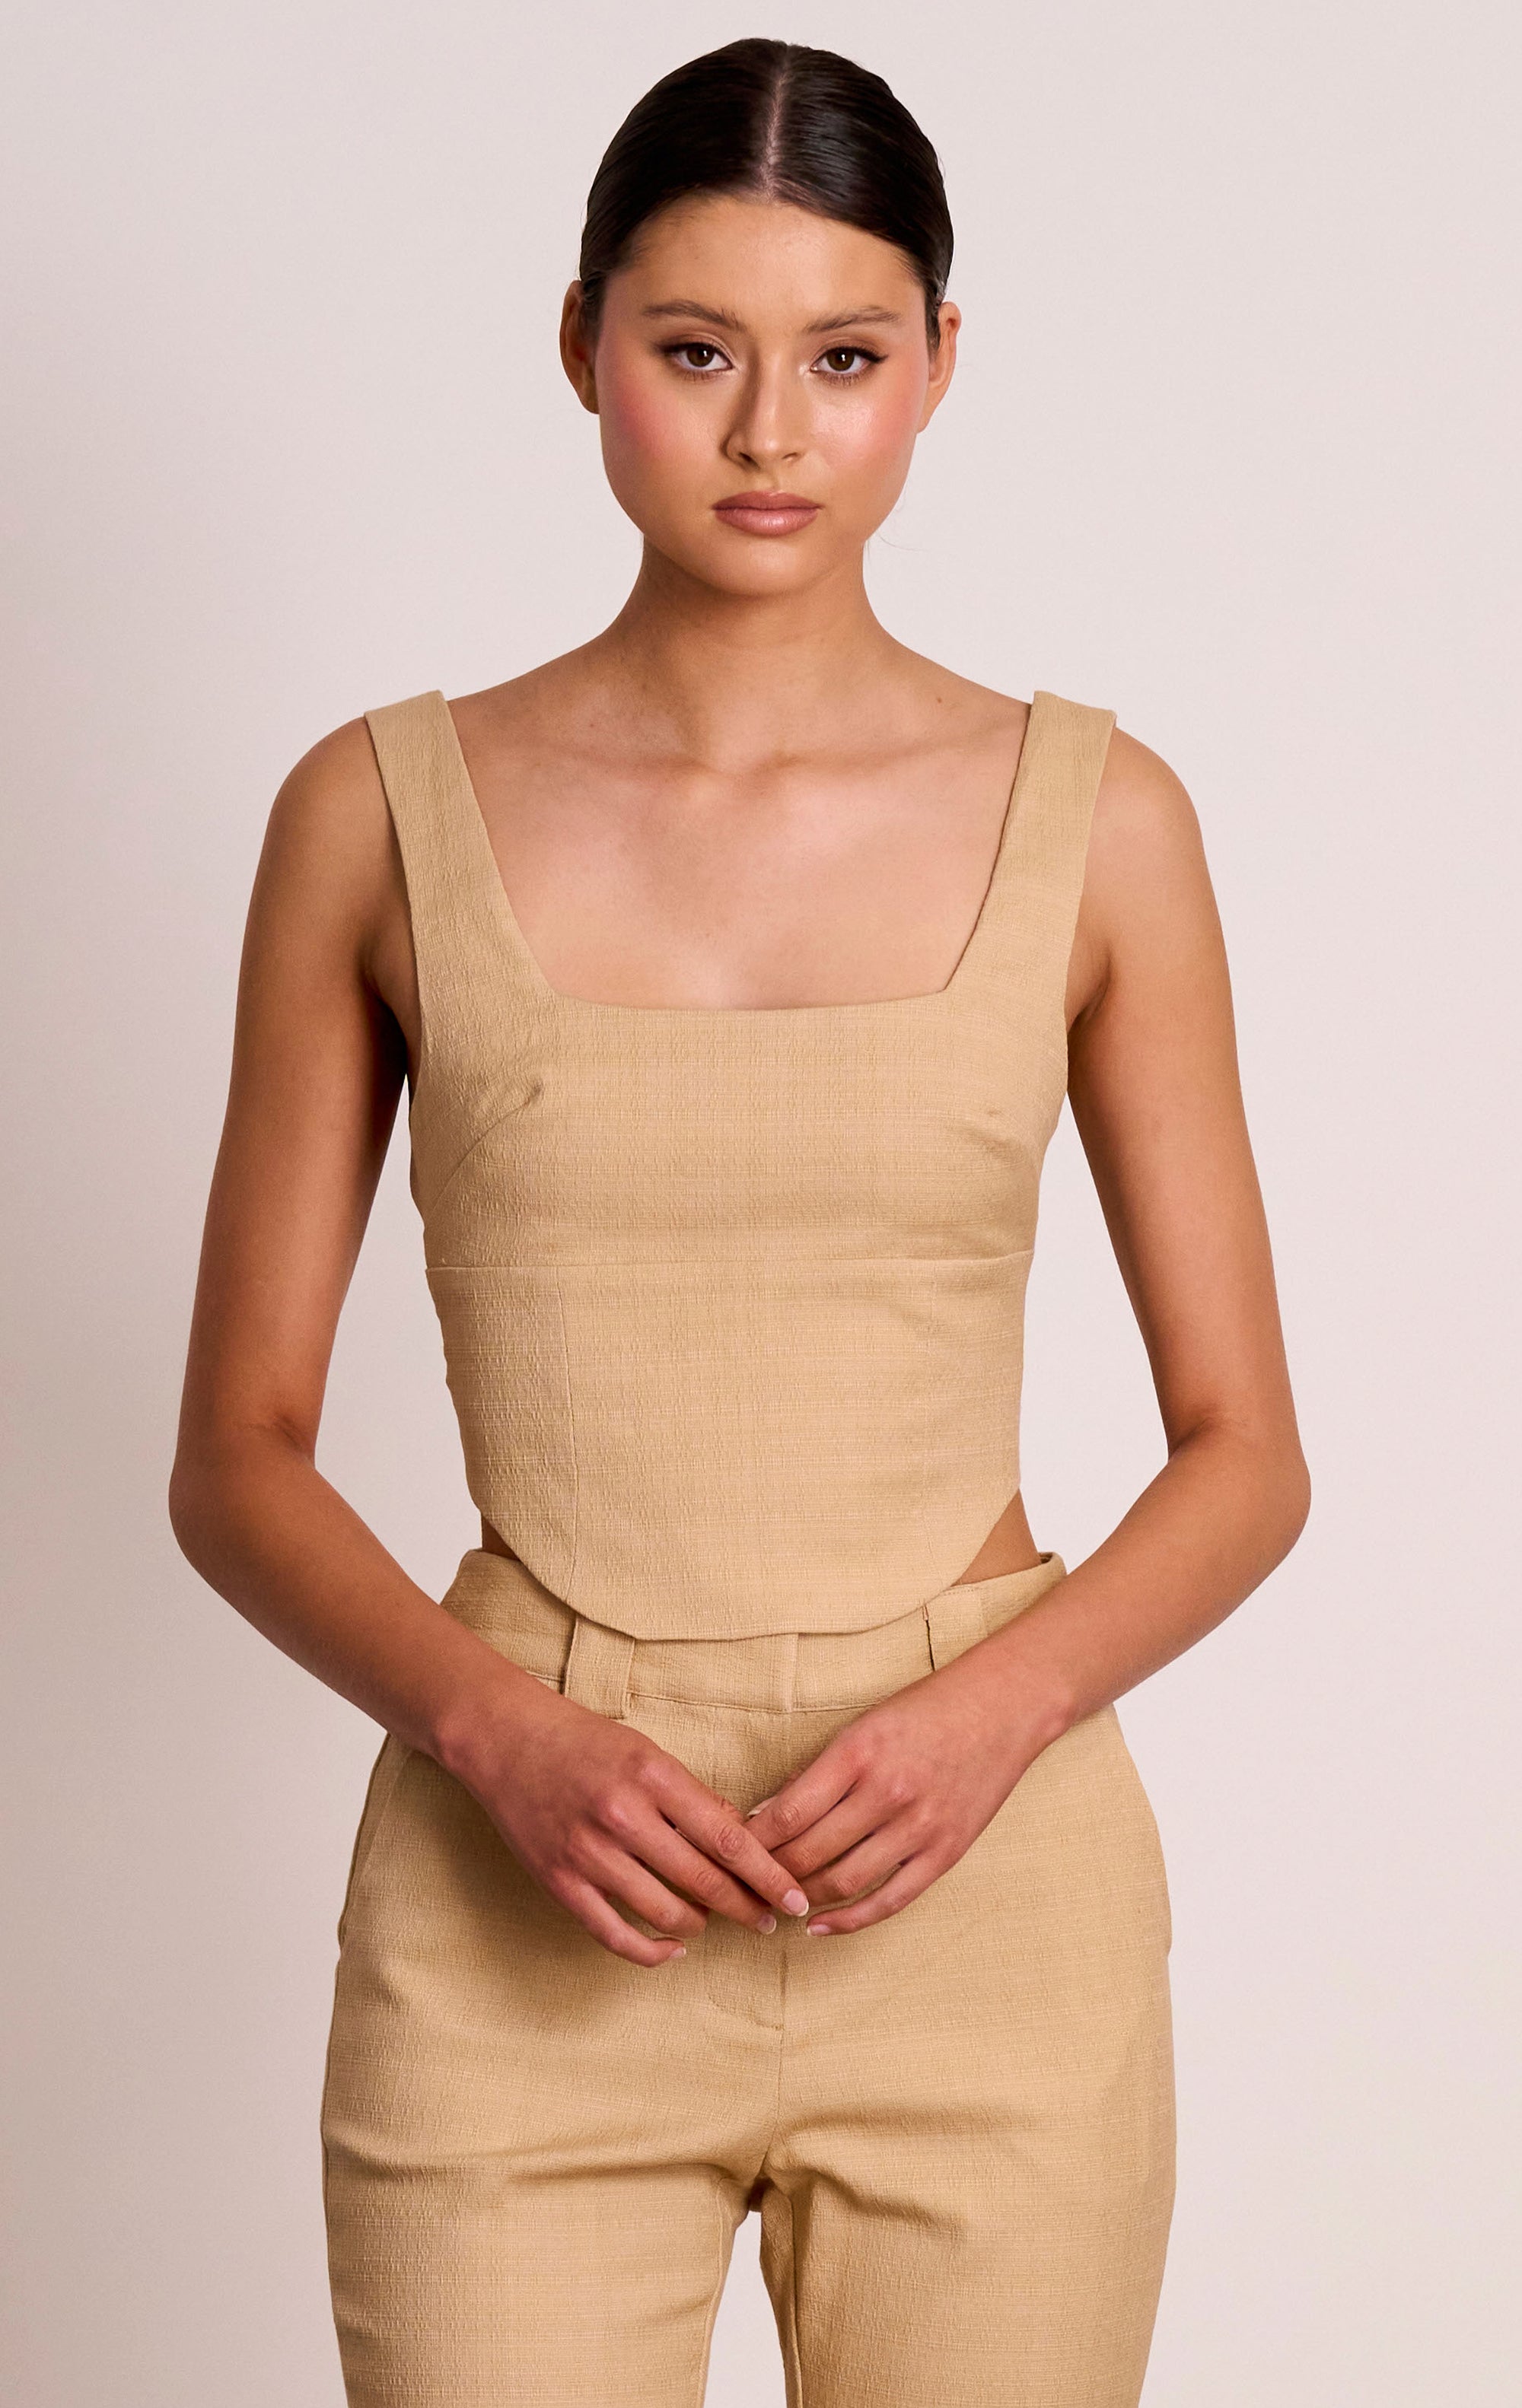 Fever Bodice - TAKE 40% OFF DISCOUNT APPLIED AT CHECKOUT